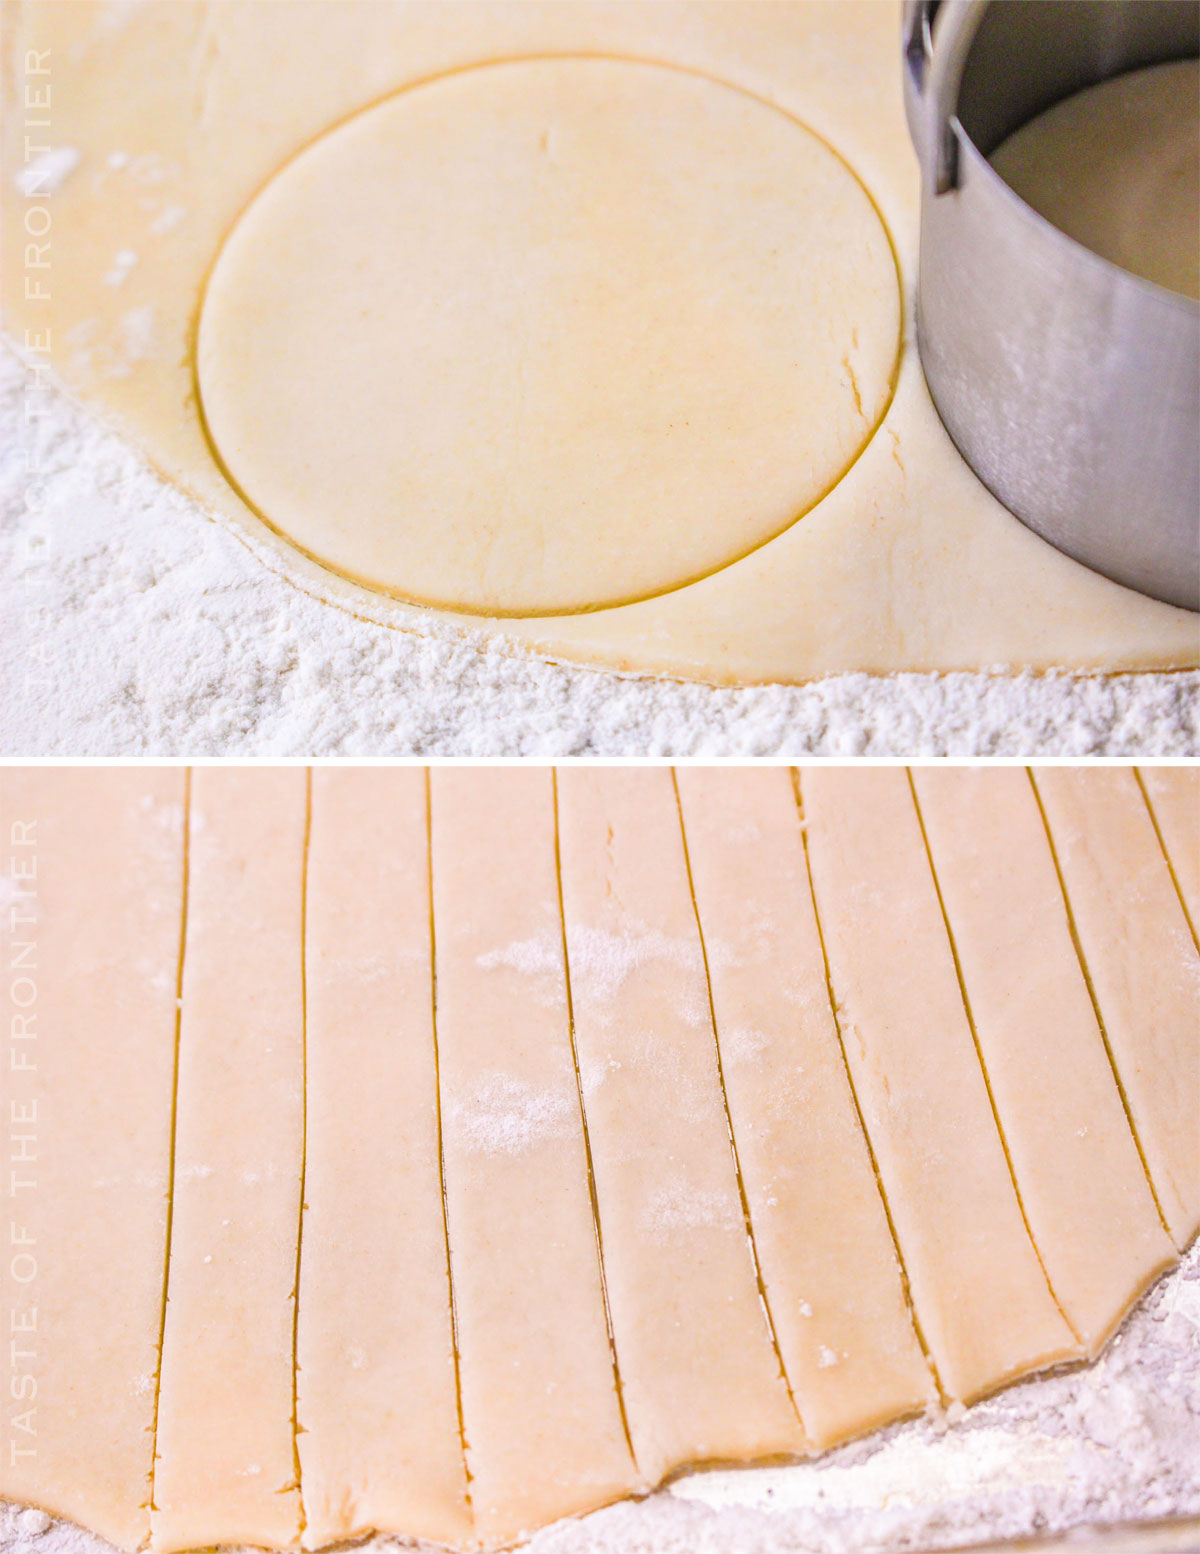 cutting the pastry dough